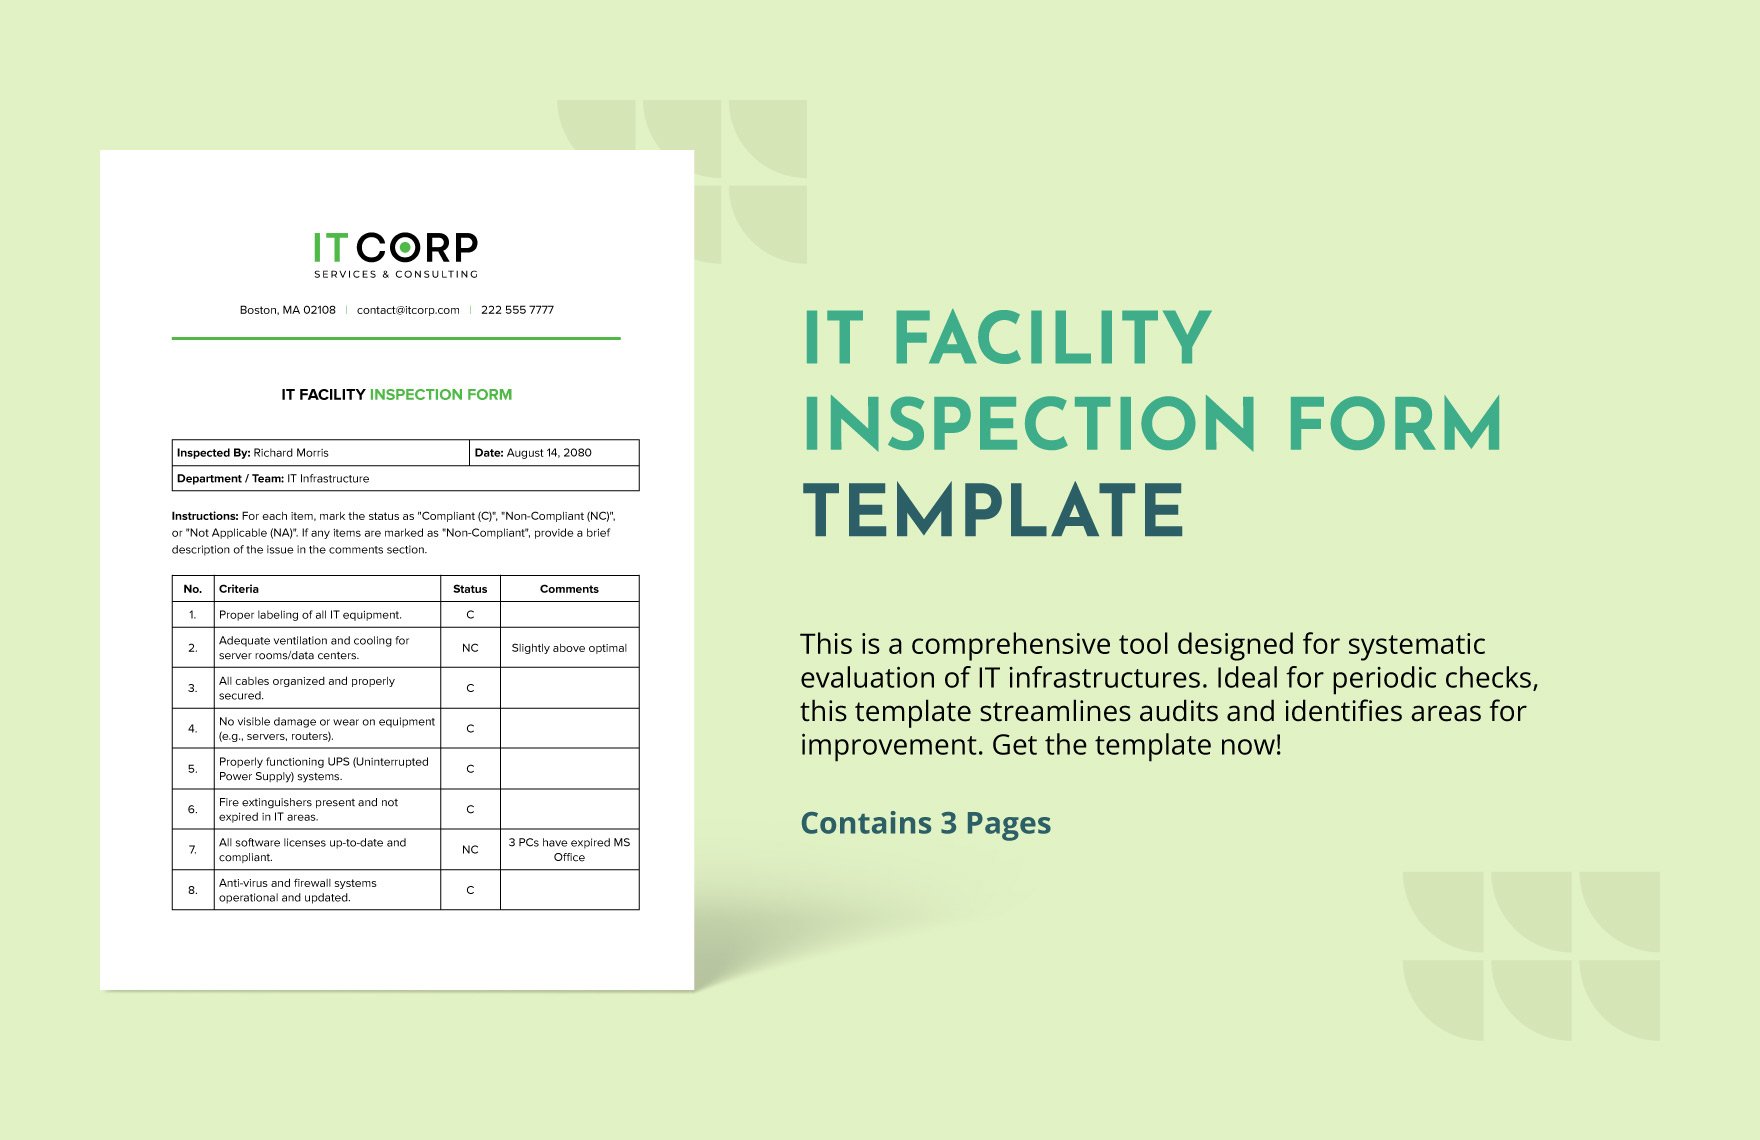 IT Facility Inspection Form Template